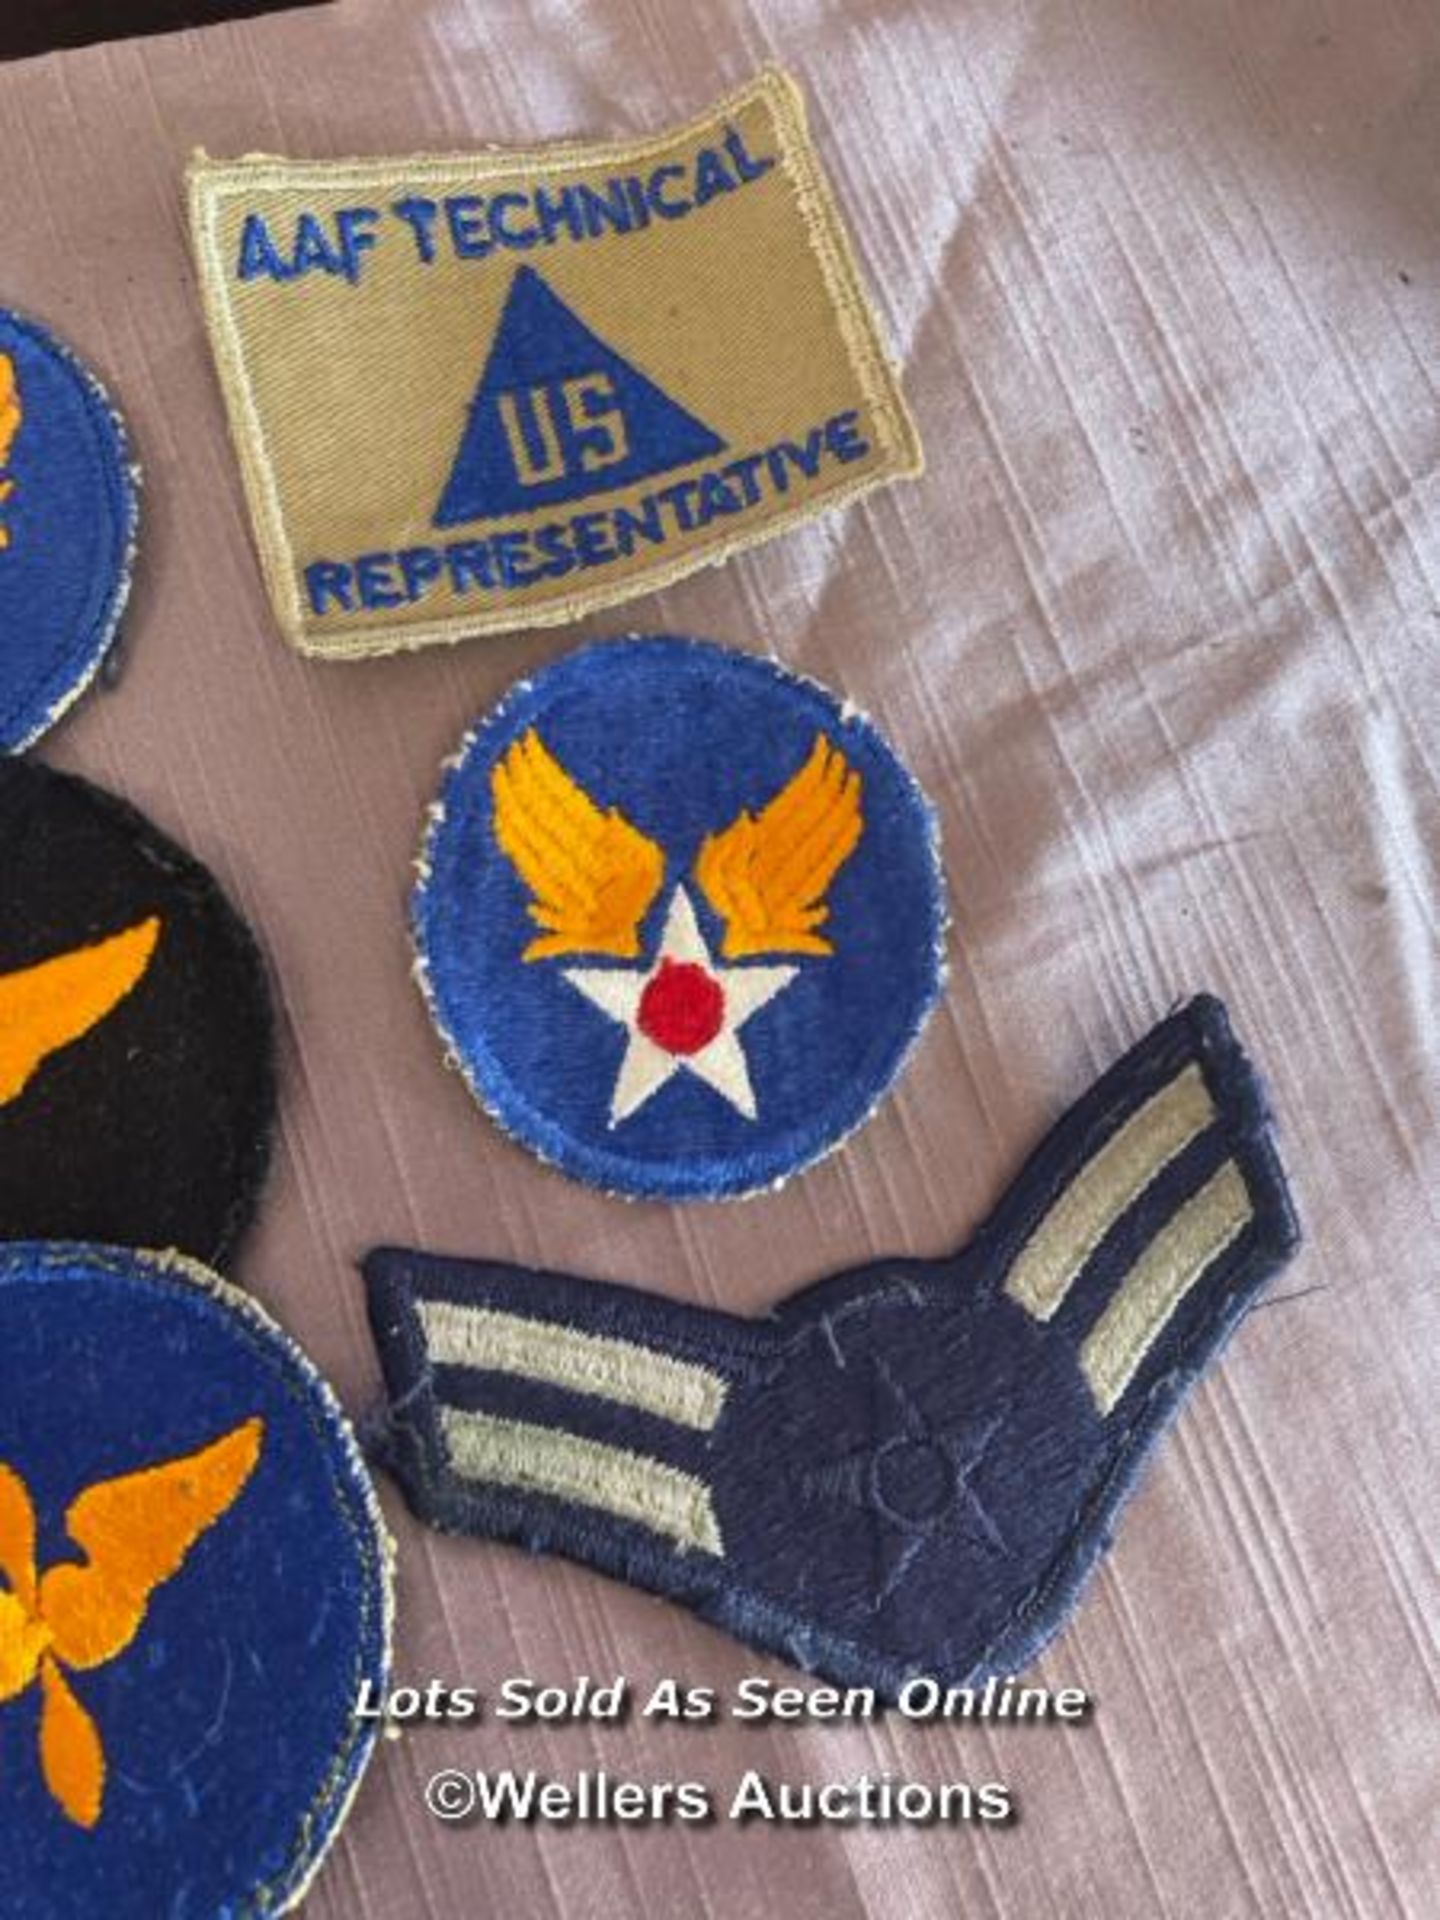 SELECTION OF AMERICAN ARMY AIRFORCE FORMATION PATCHES - Image 3 of 3